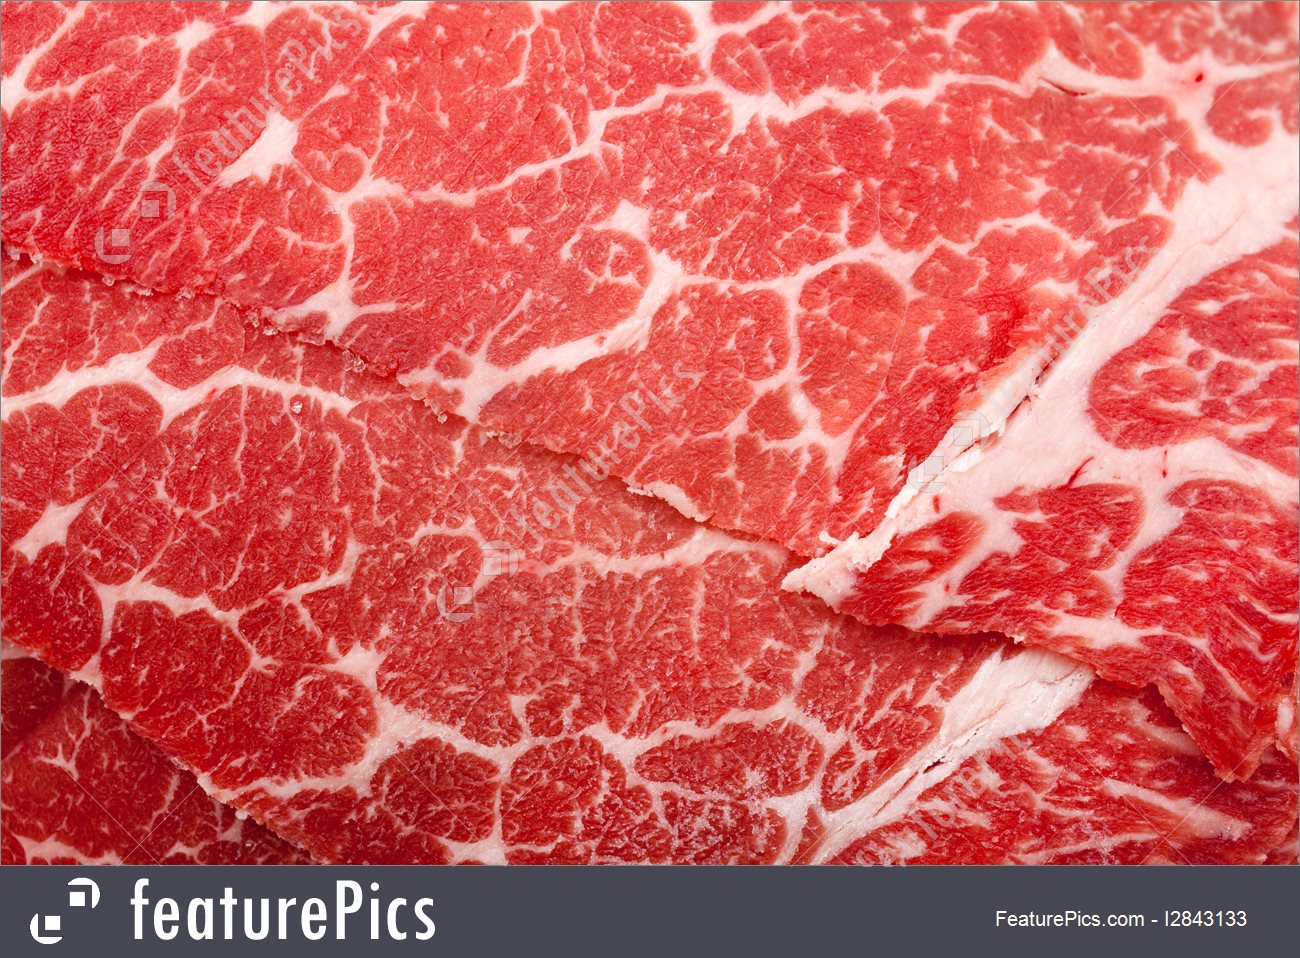 Meat Textured